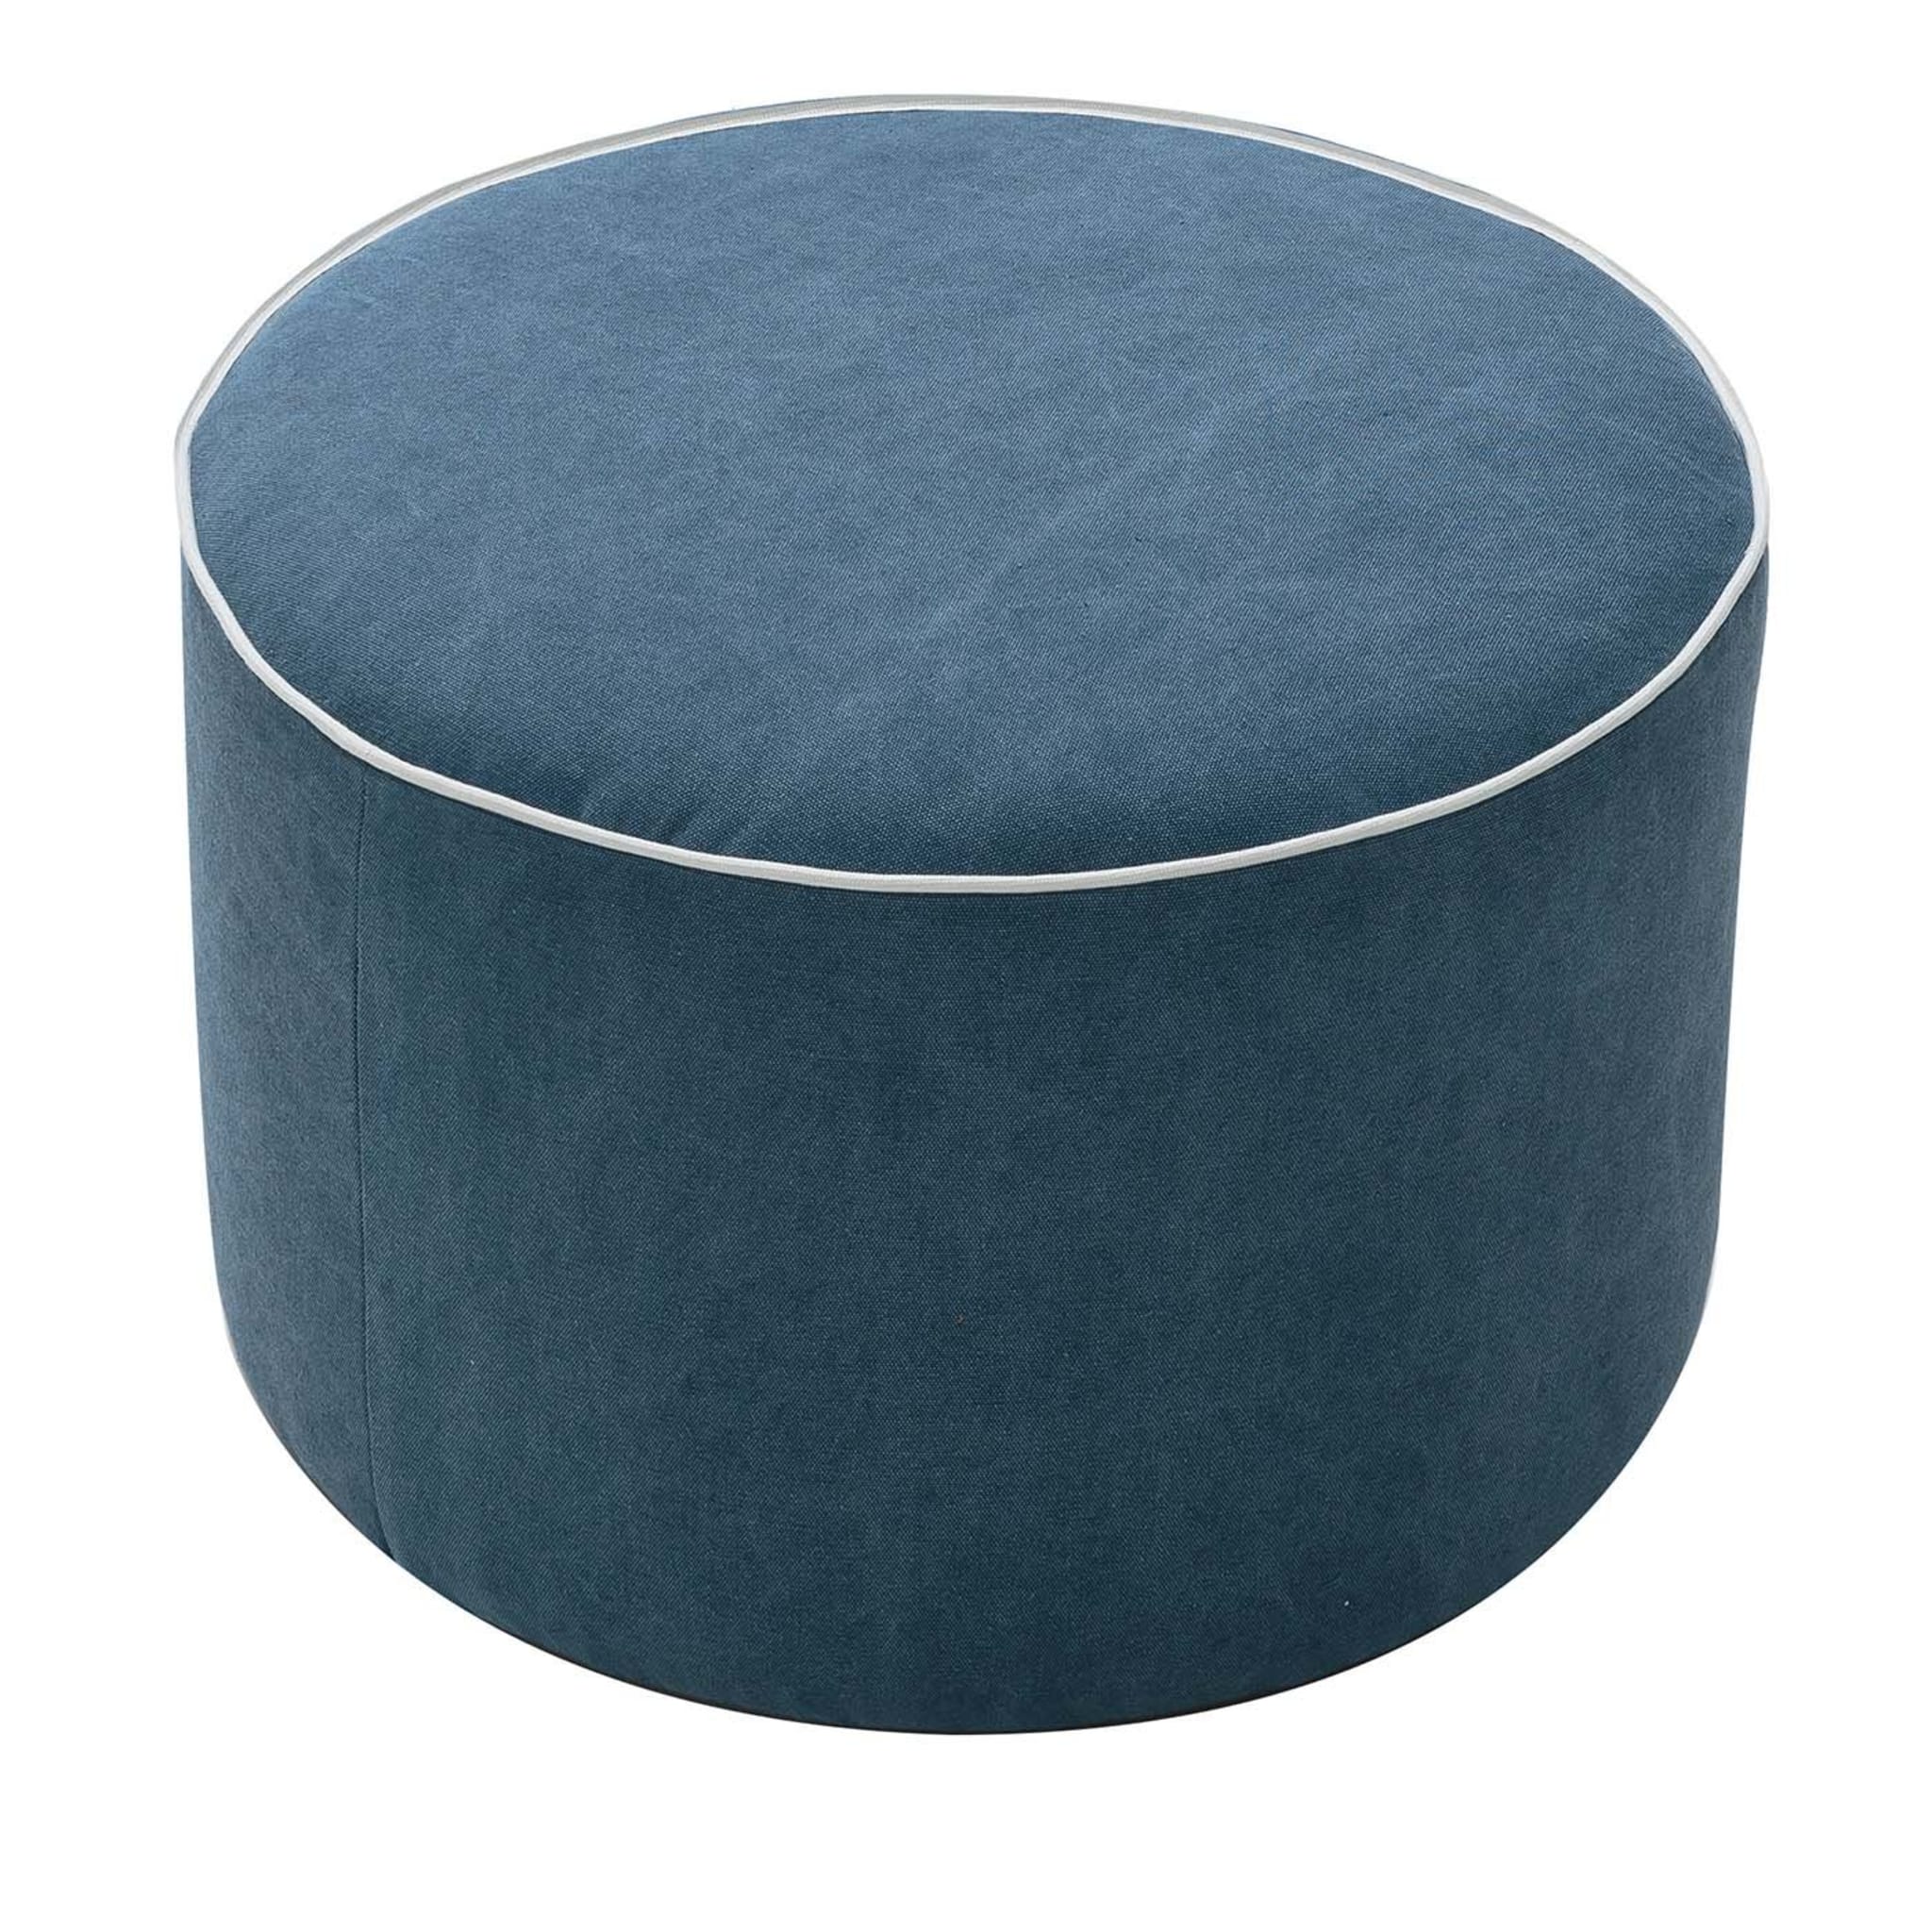 Billy Blue Round Pouf - Main view